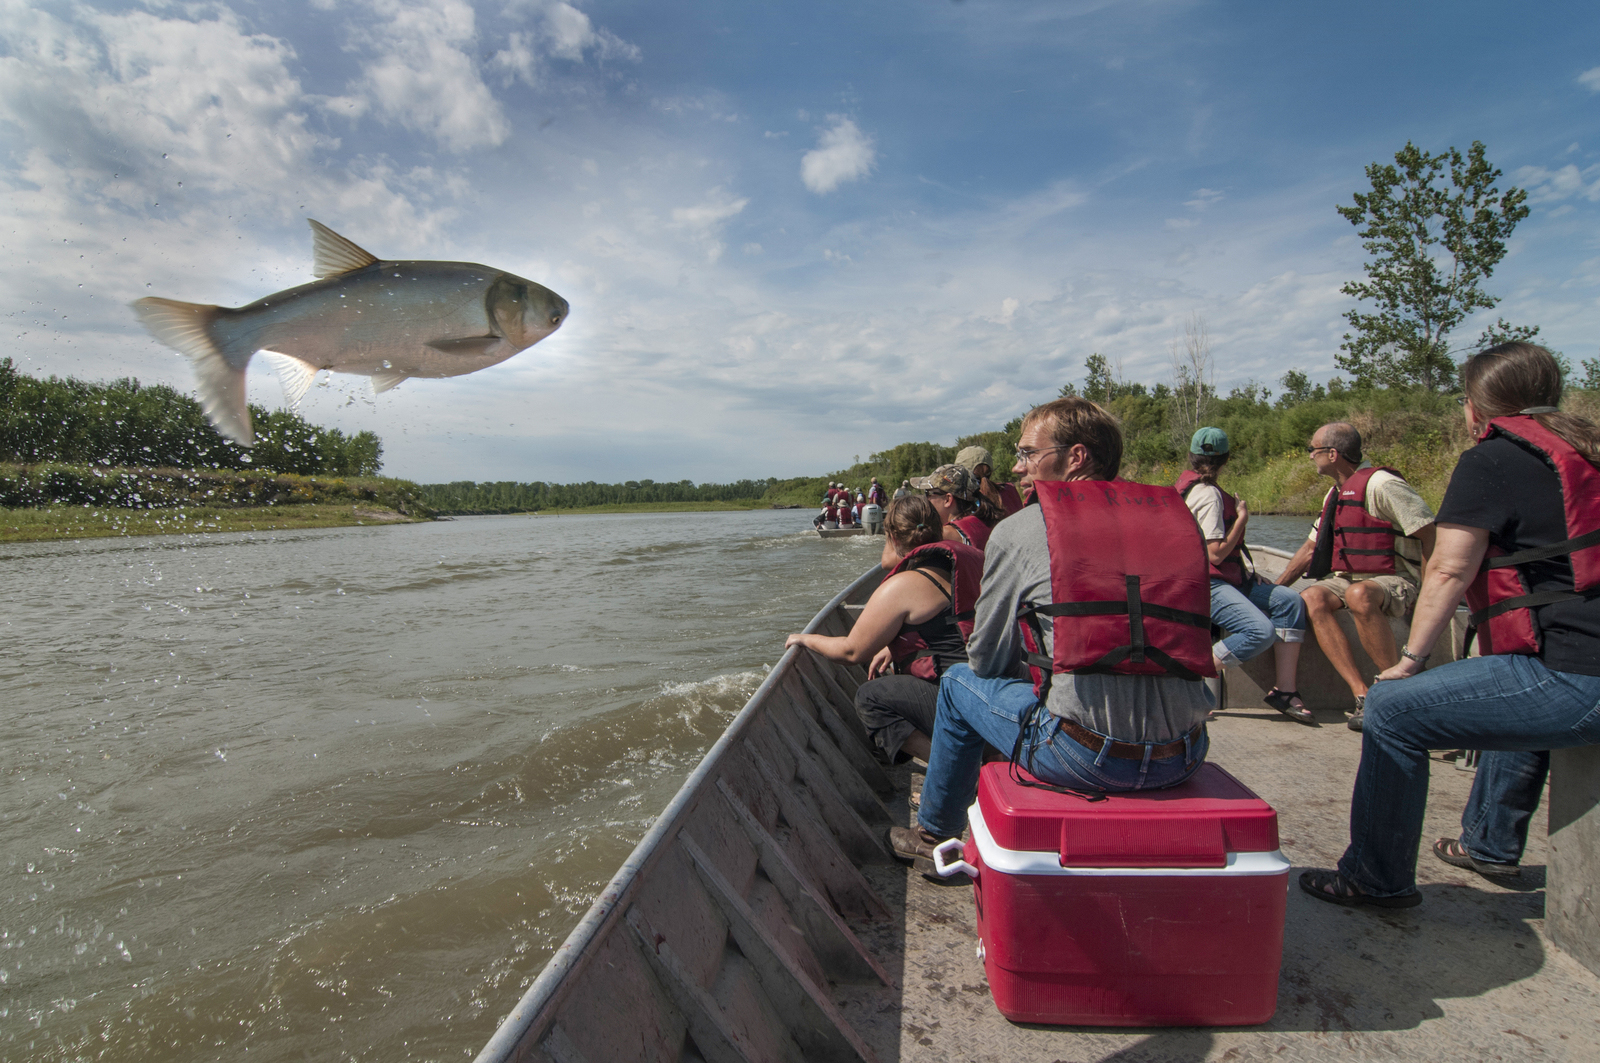 An invasive carp jumping out of the water near a boat on a river.